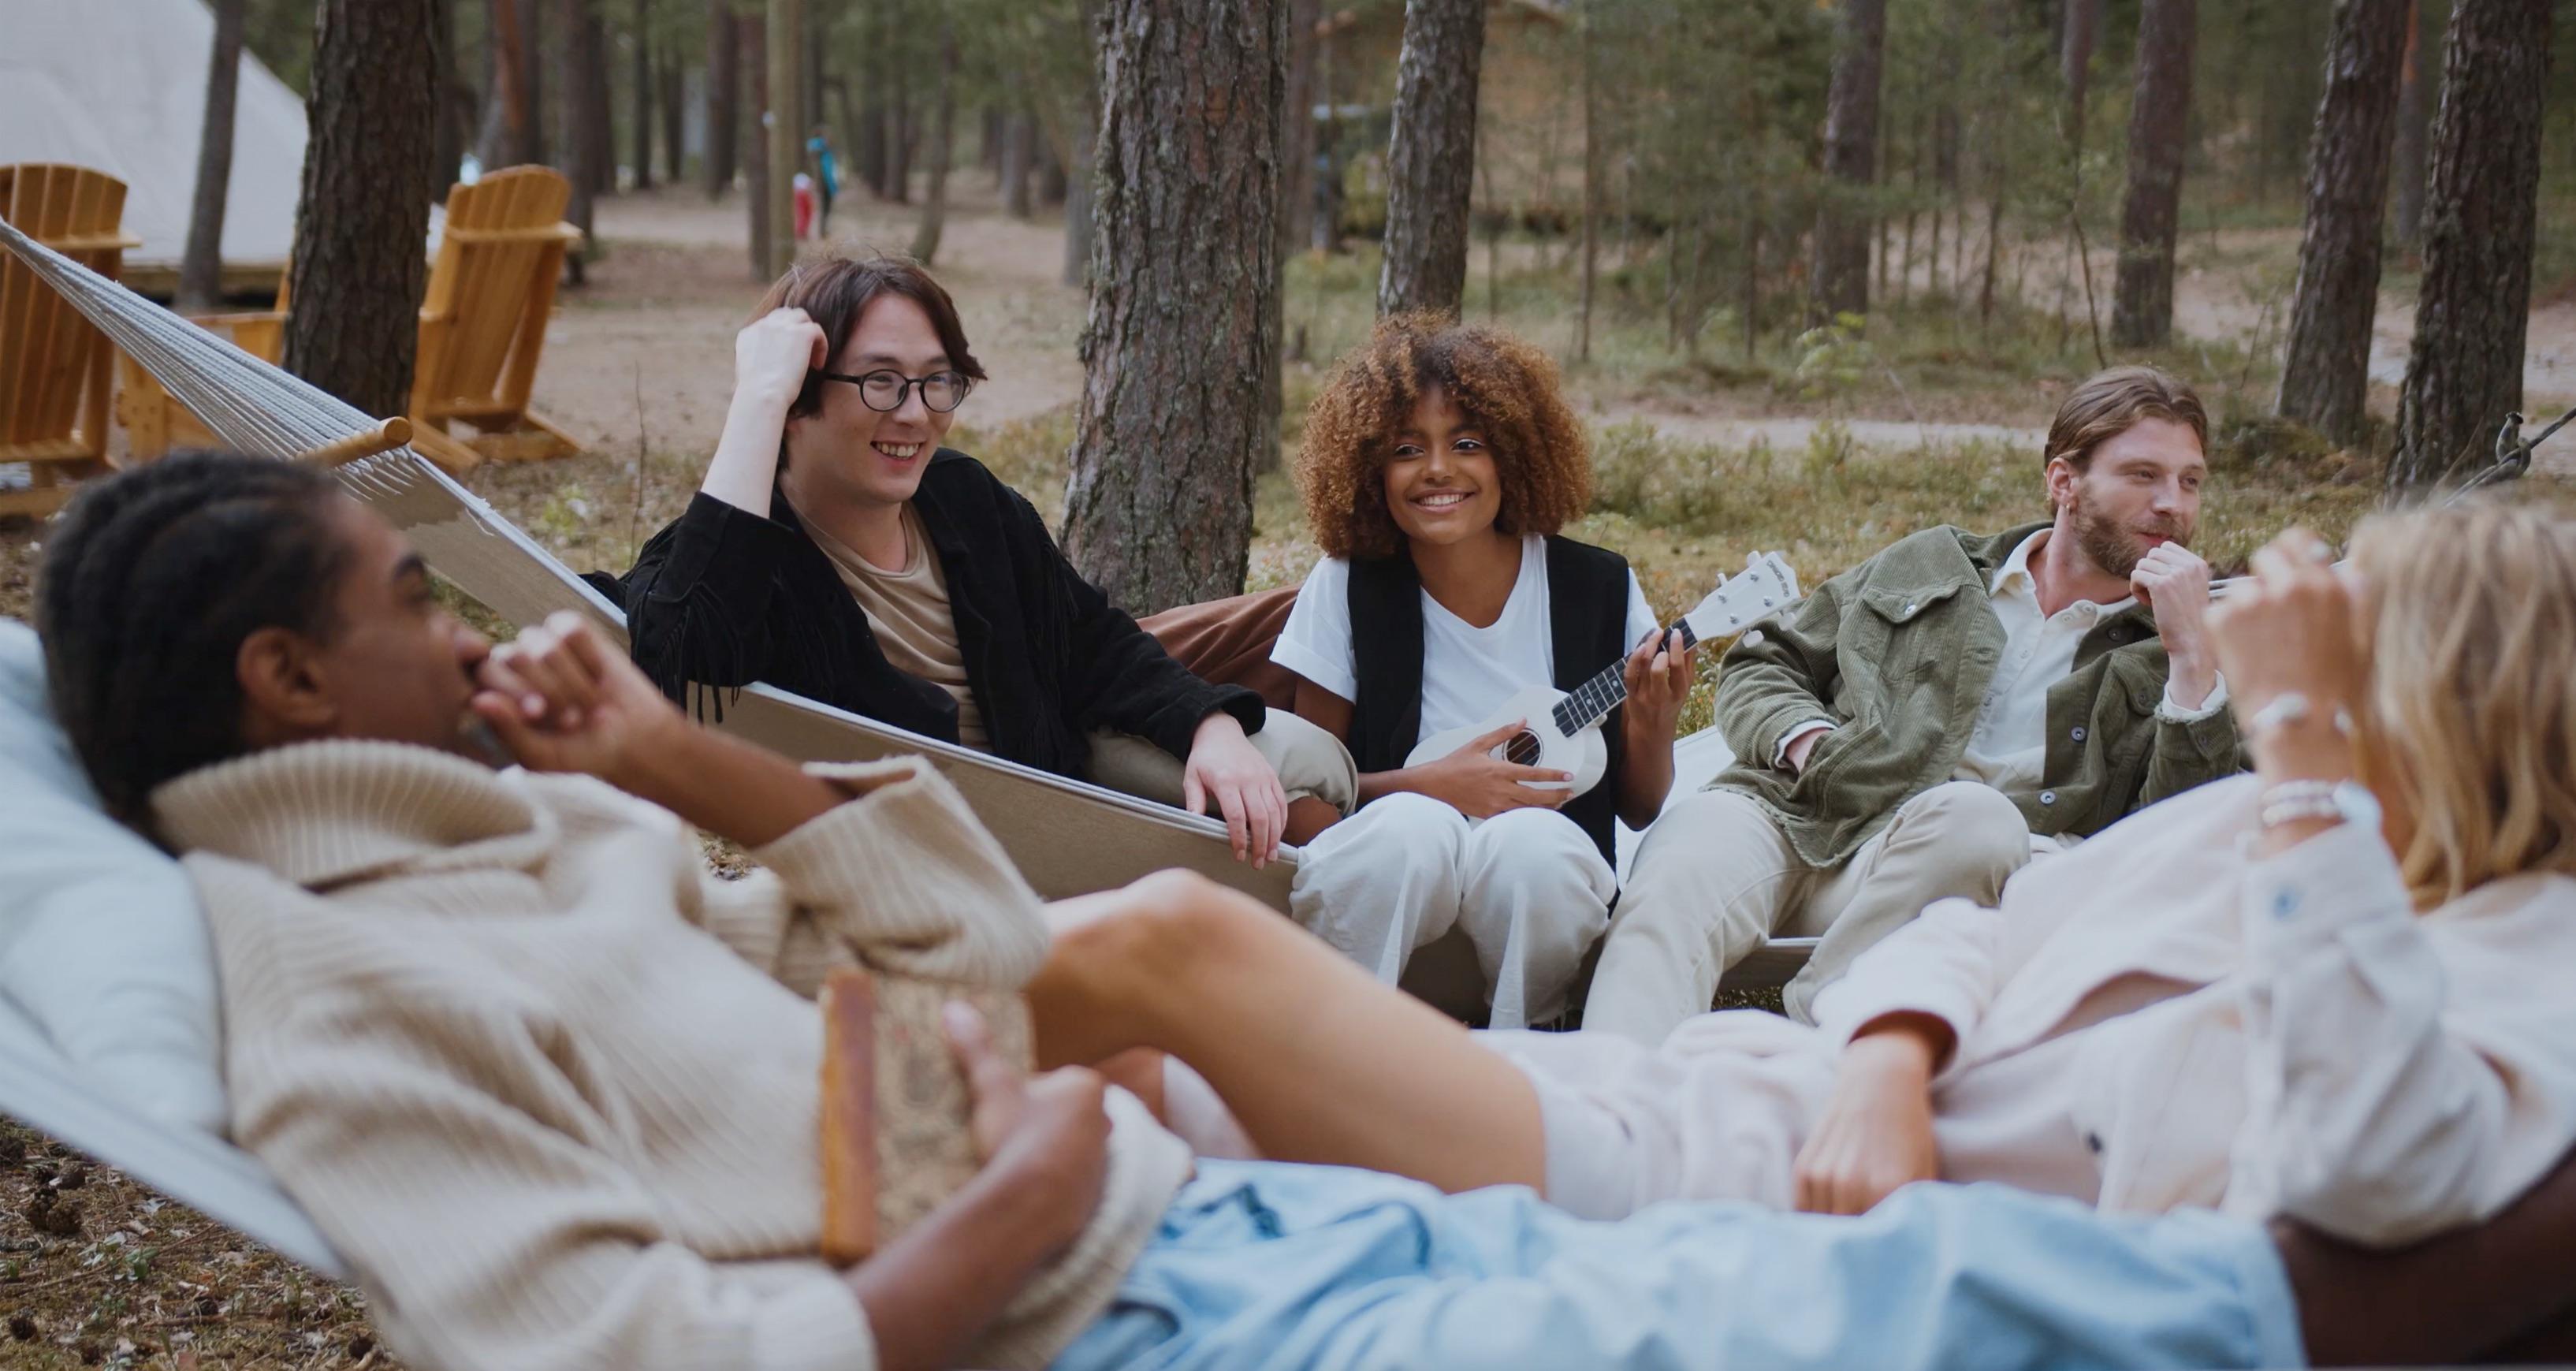 Image showing a group of people at a campsite relaxing and having fun